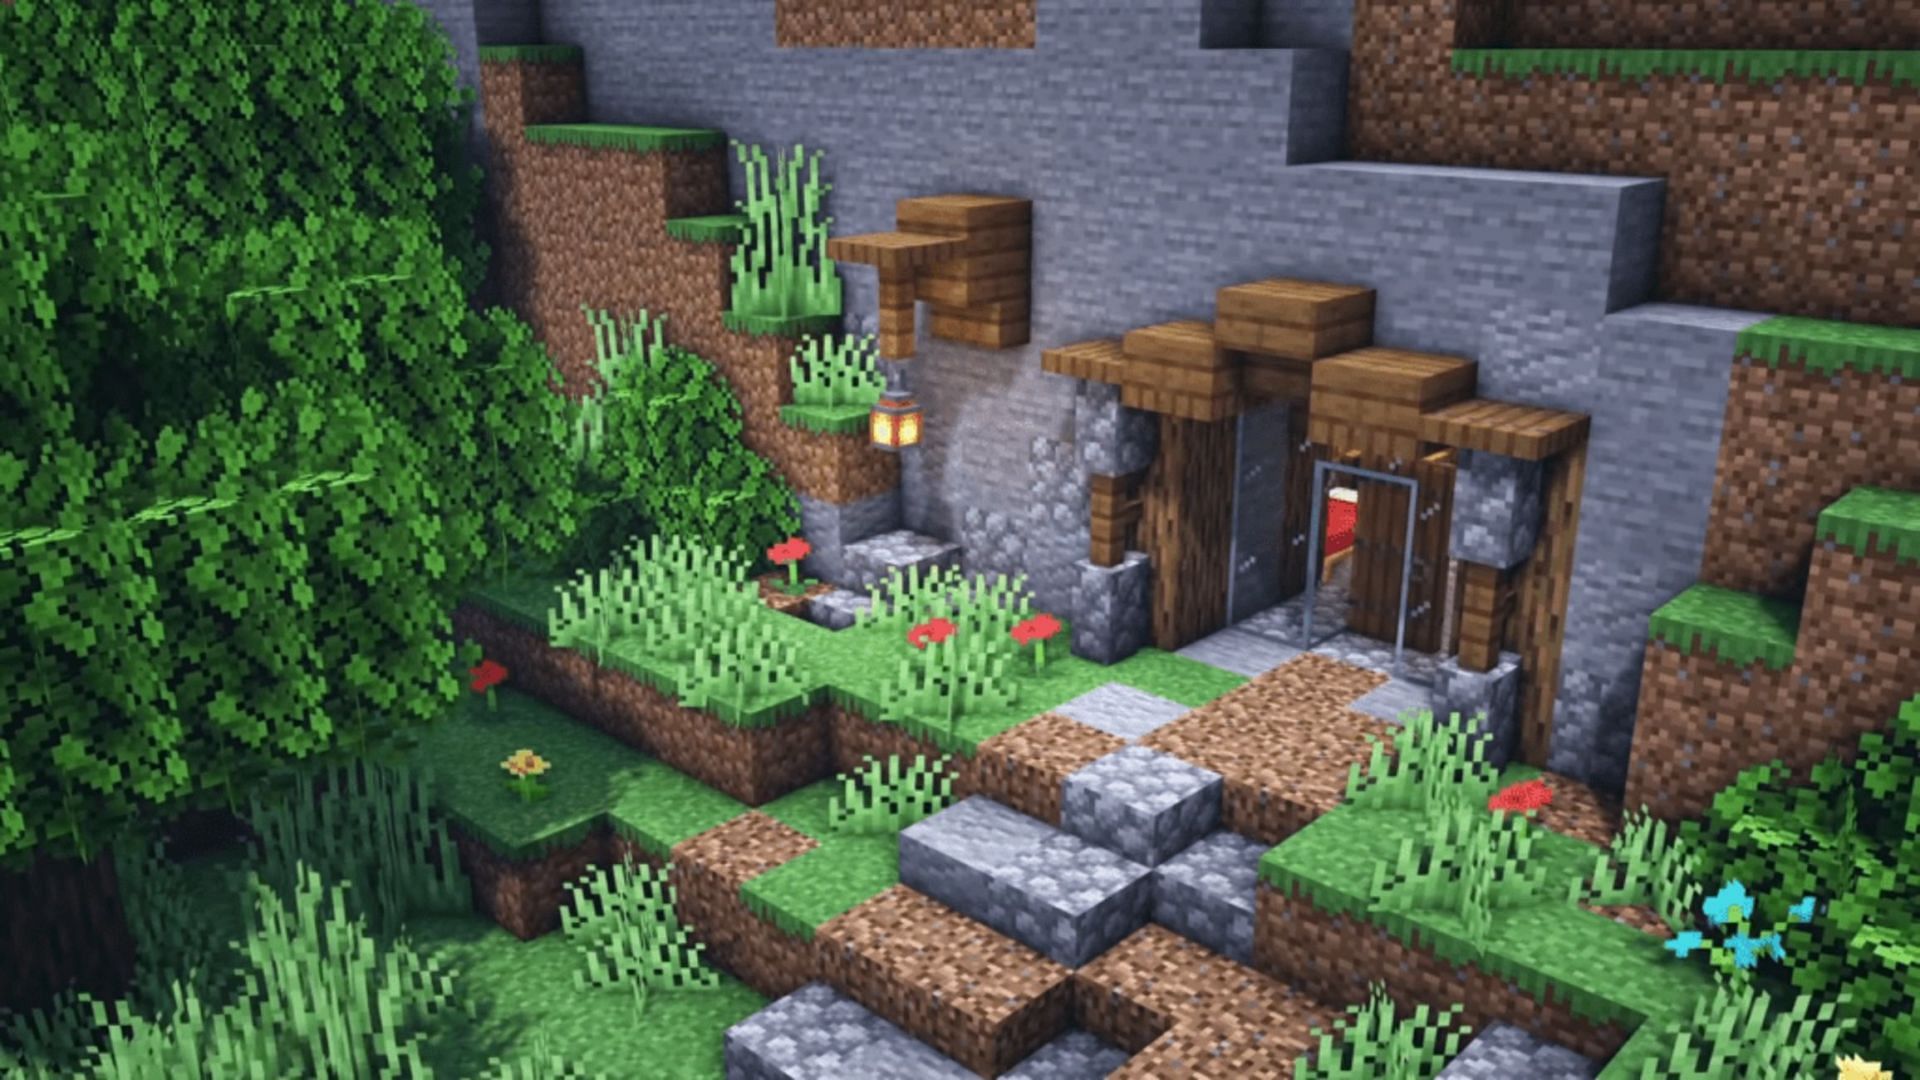 Building a home out of the natural terrain is highly effective (Image via TheMythicalSausage/YouTube)